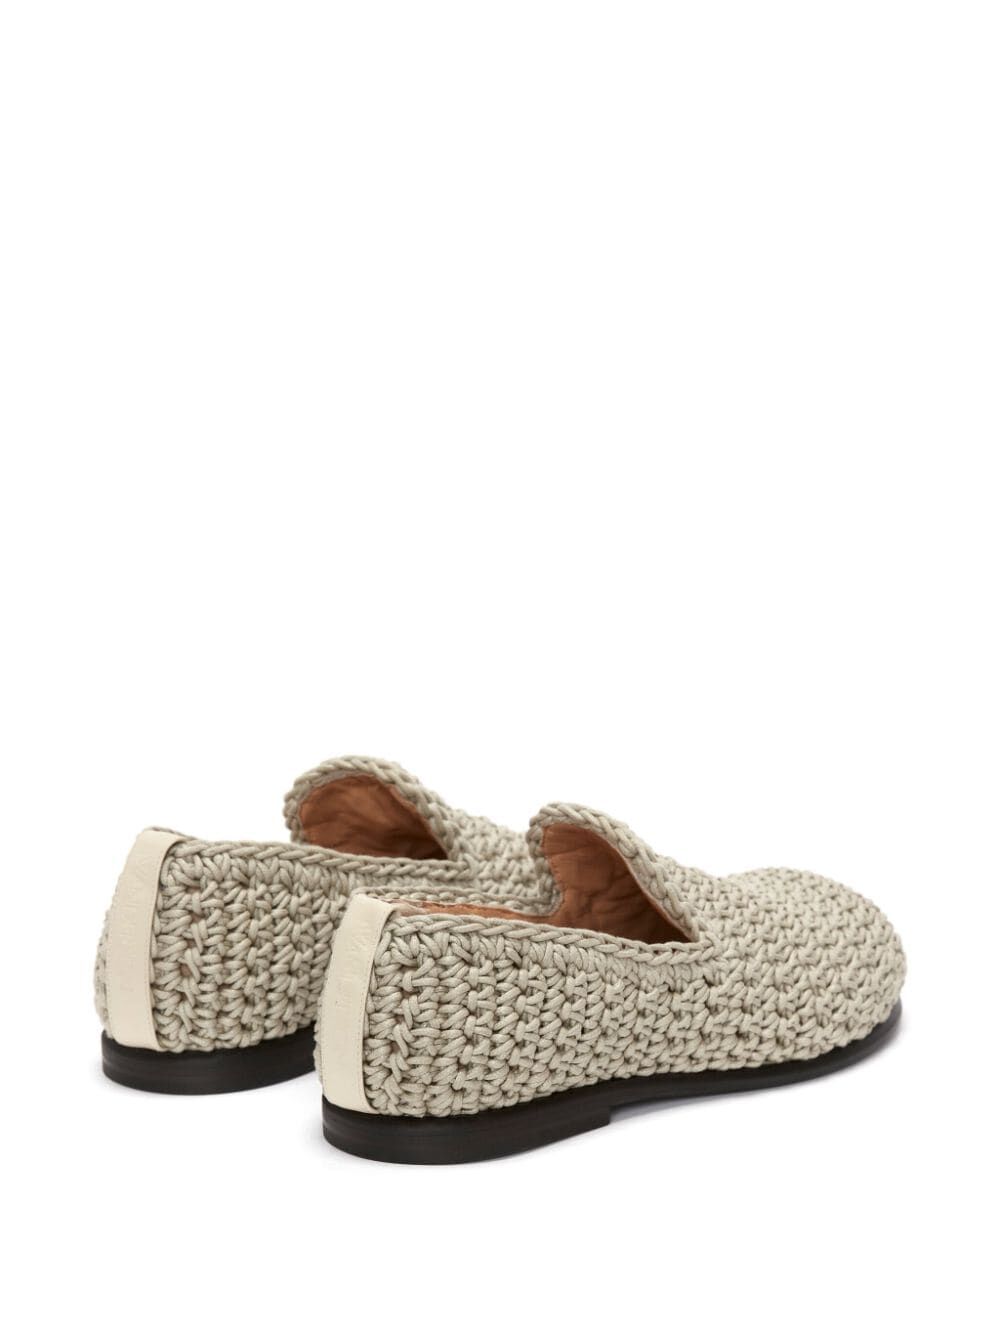 JW ANDERSON-LOAFER CROCHET-ANW42223A 19546